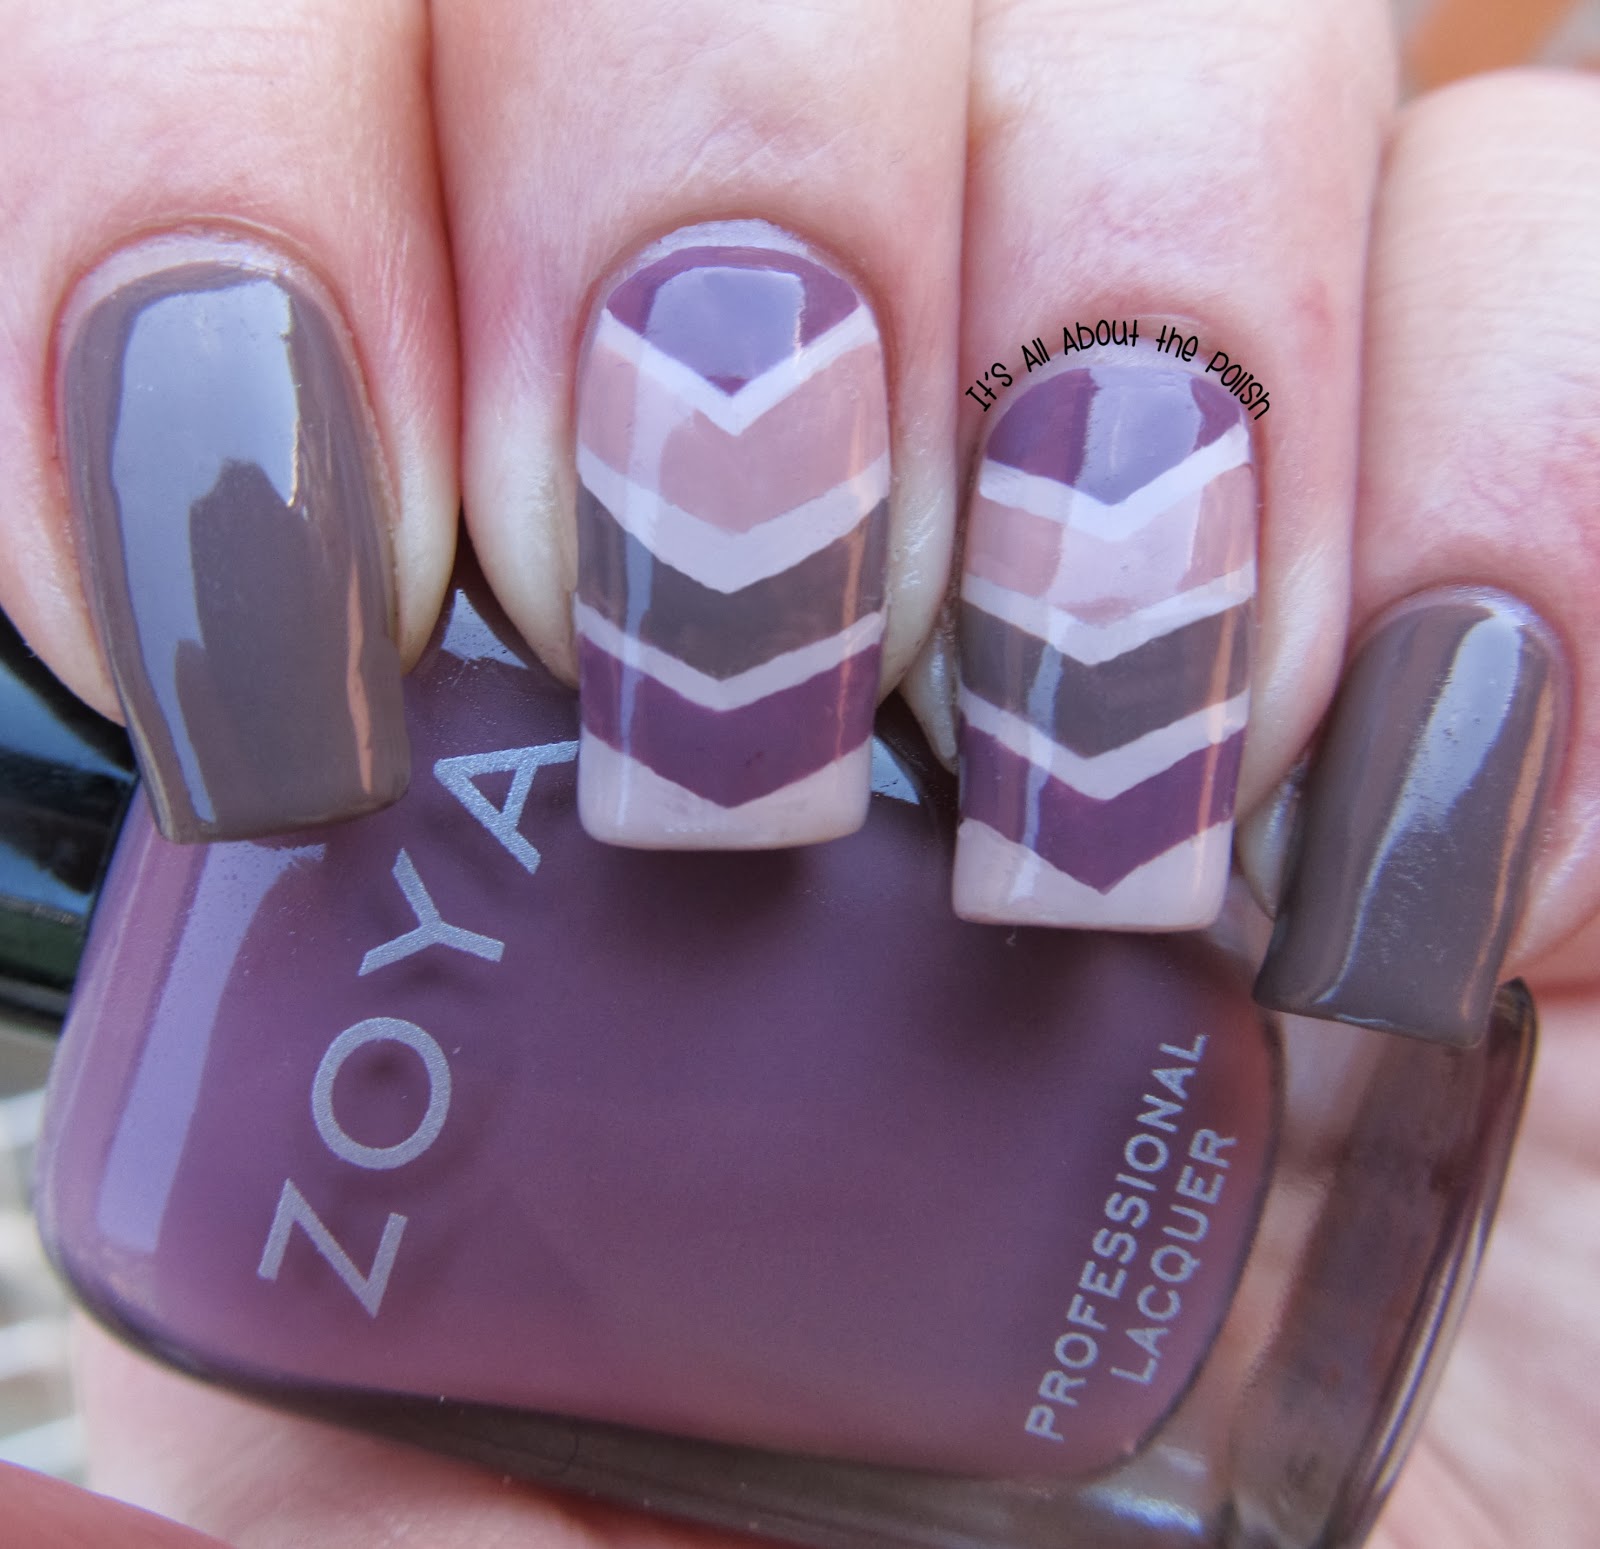 It's all about the polish: Zoya Neutrals Nail Design